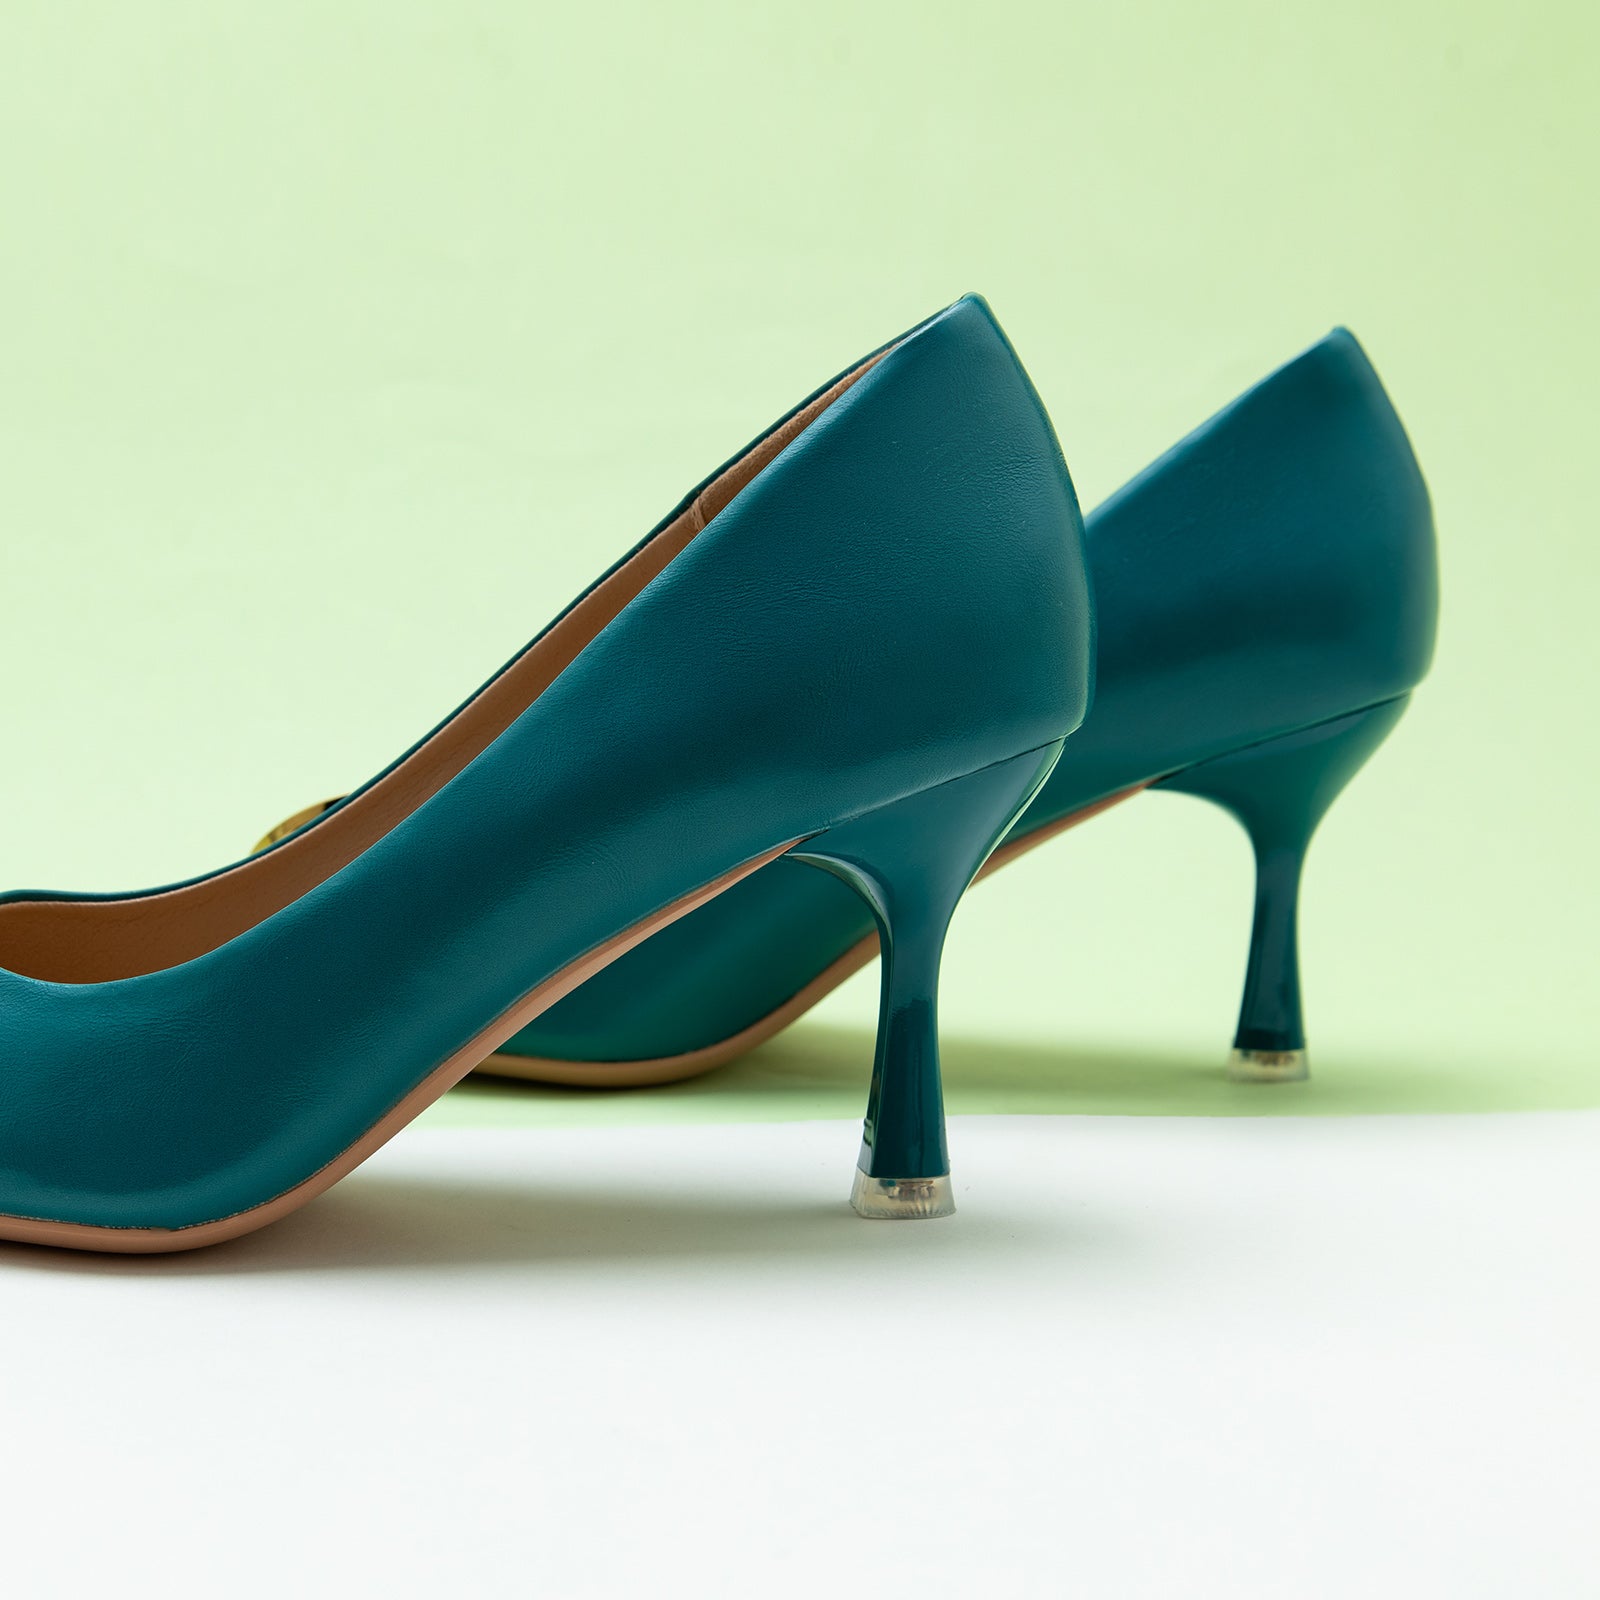 Women Pumps in Peacock Blue with stylish metal buckles, featuring classic details for a polished and opulent style